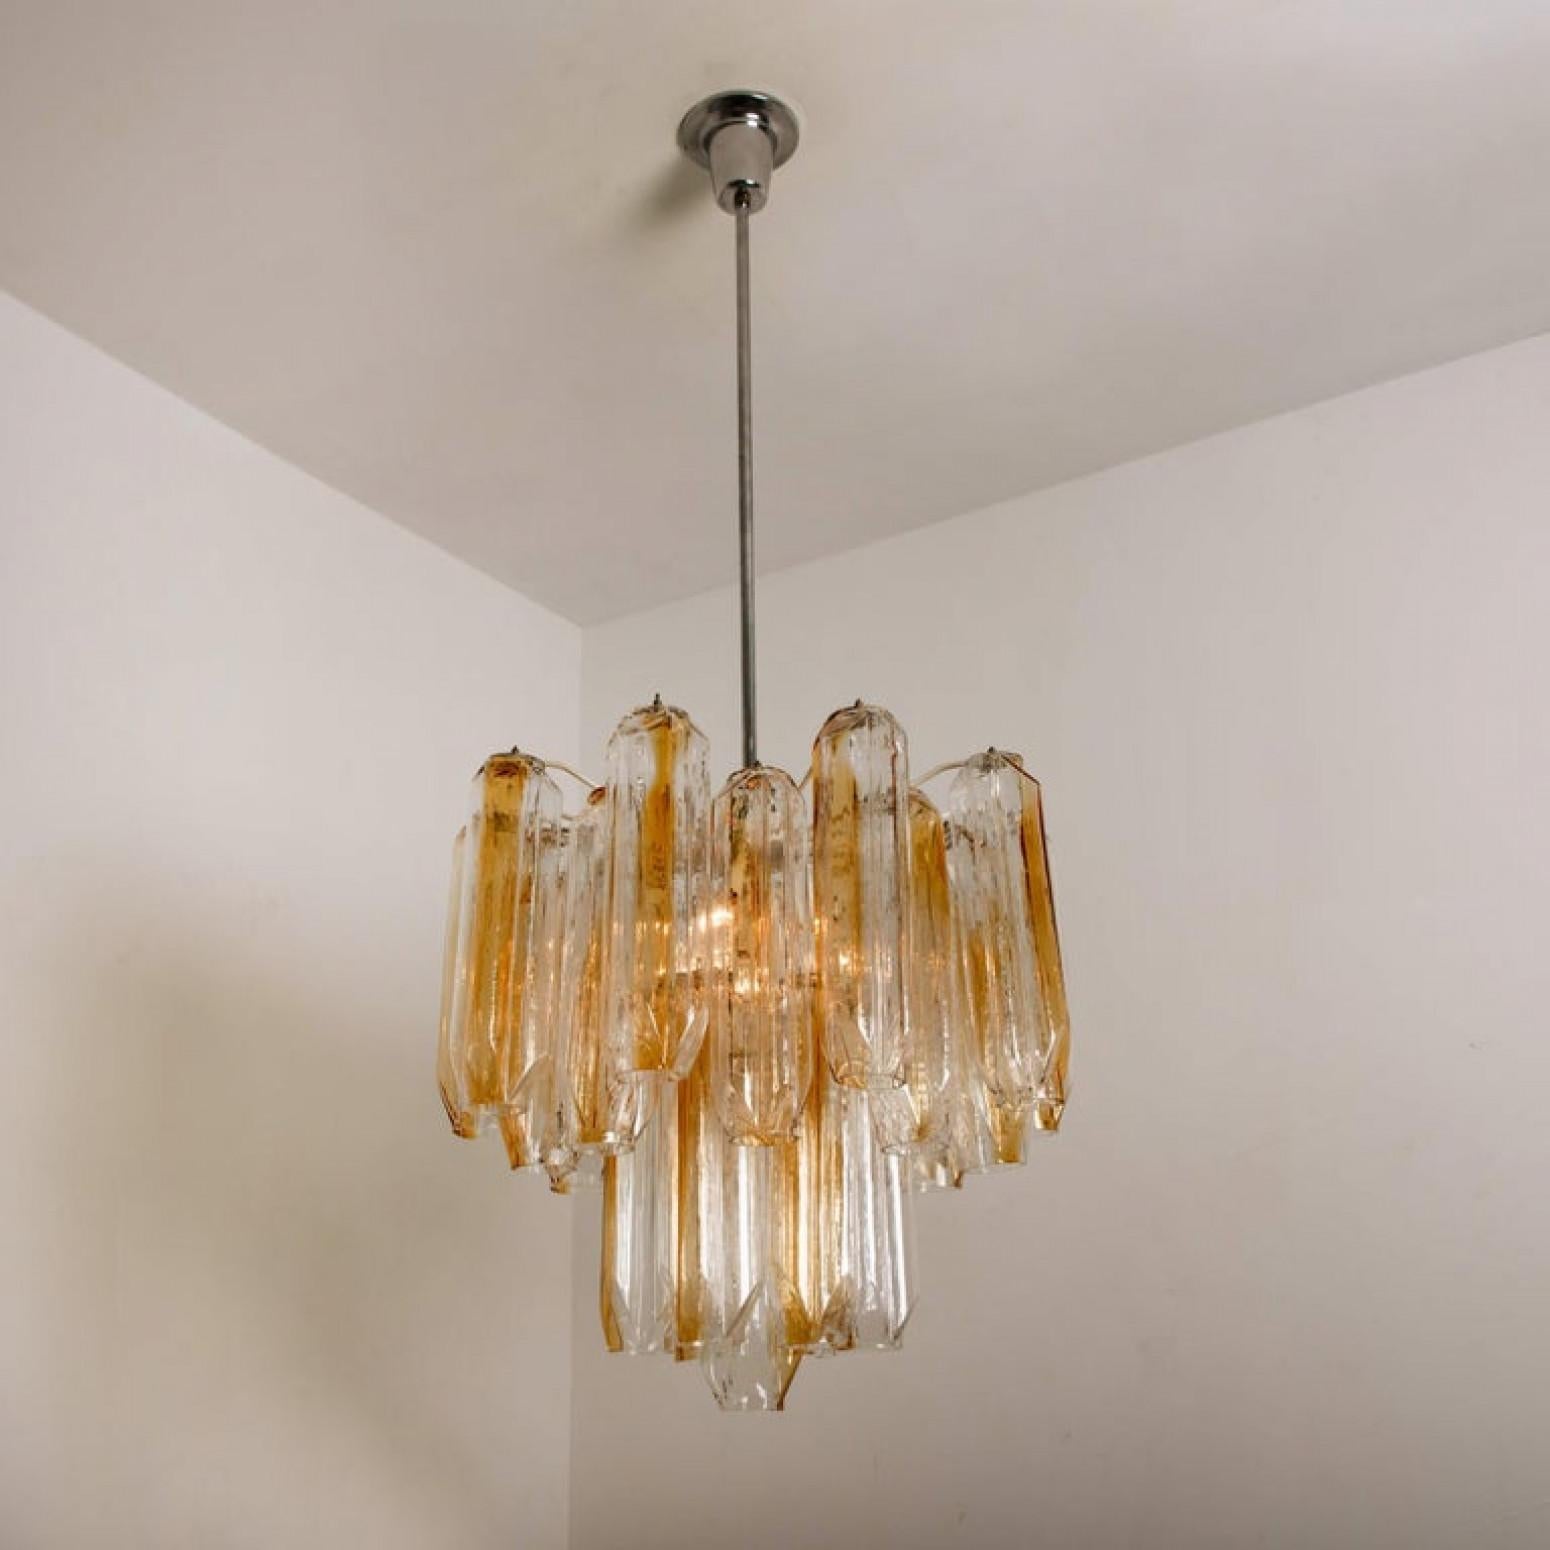 A stunning and high quality masterpiece chandelier by J.T. Kalmar, Germany, 1970. It features 25 Murano blown art angled glass tubes on a white colored metal structure. Chrome-plated steel rod.

The tubes refract light beautifully and are perfect